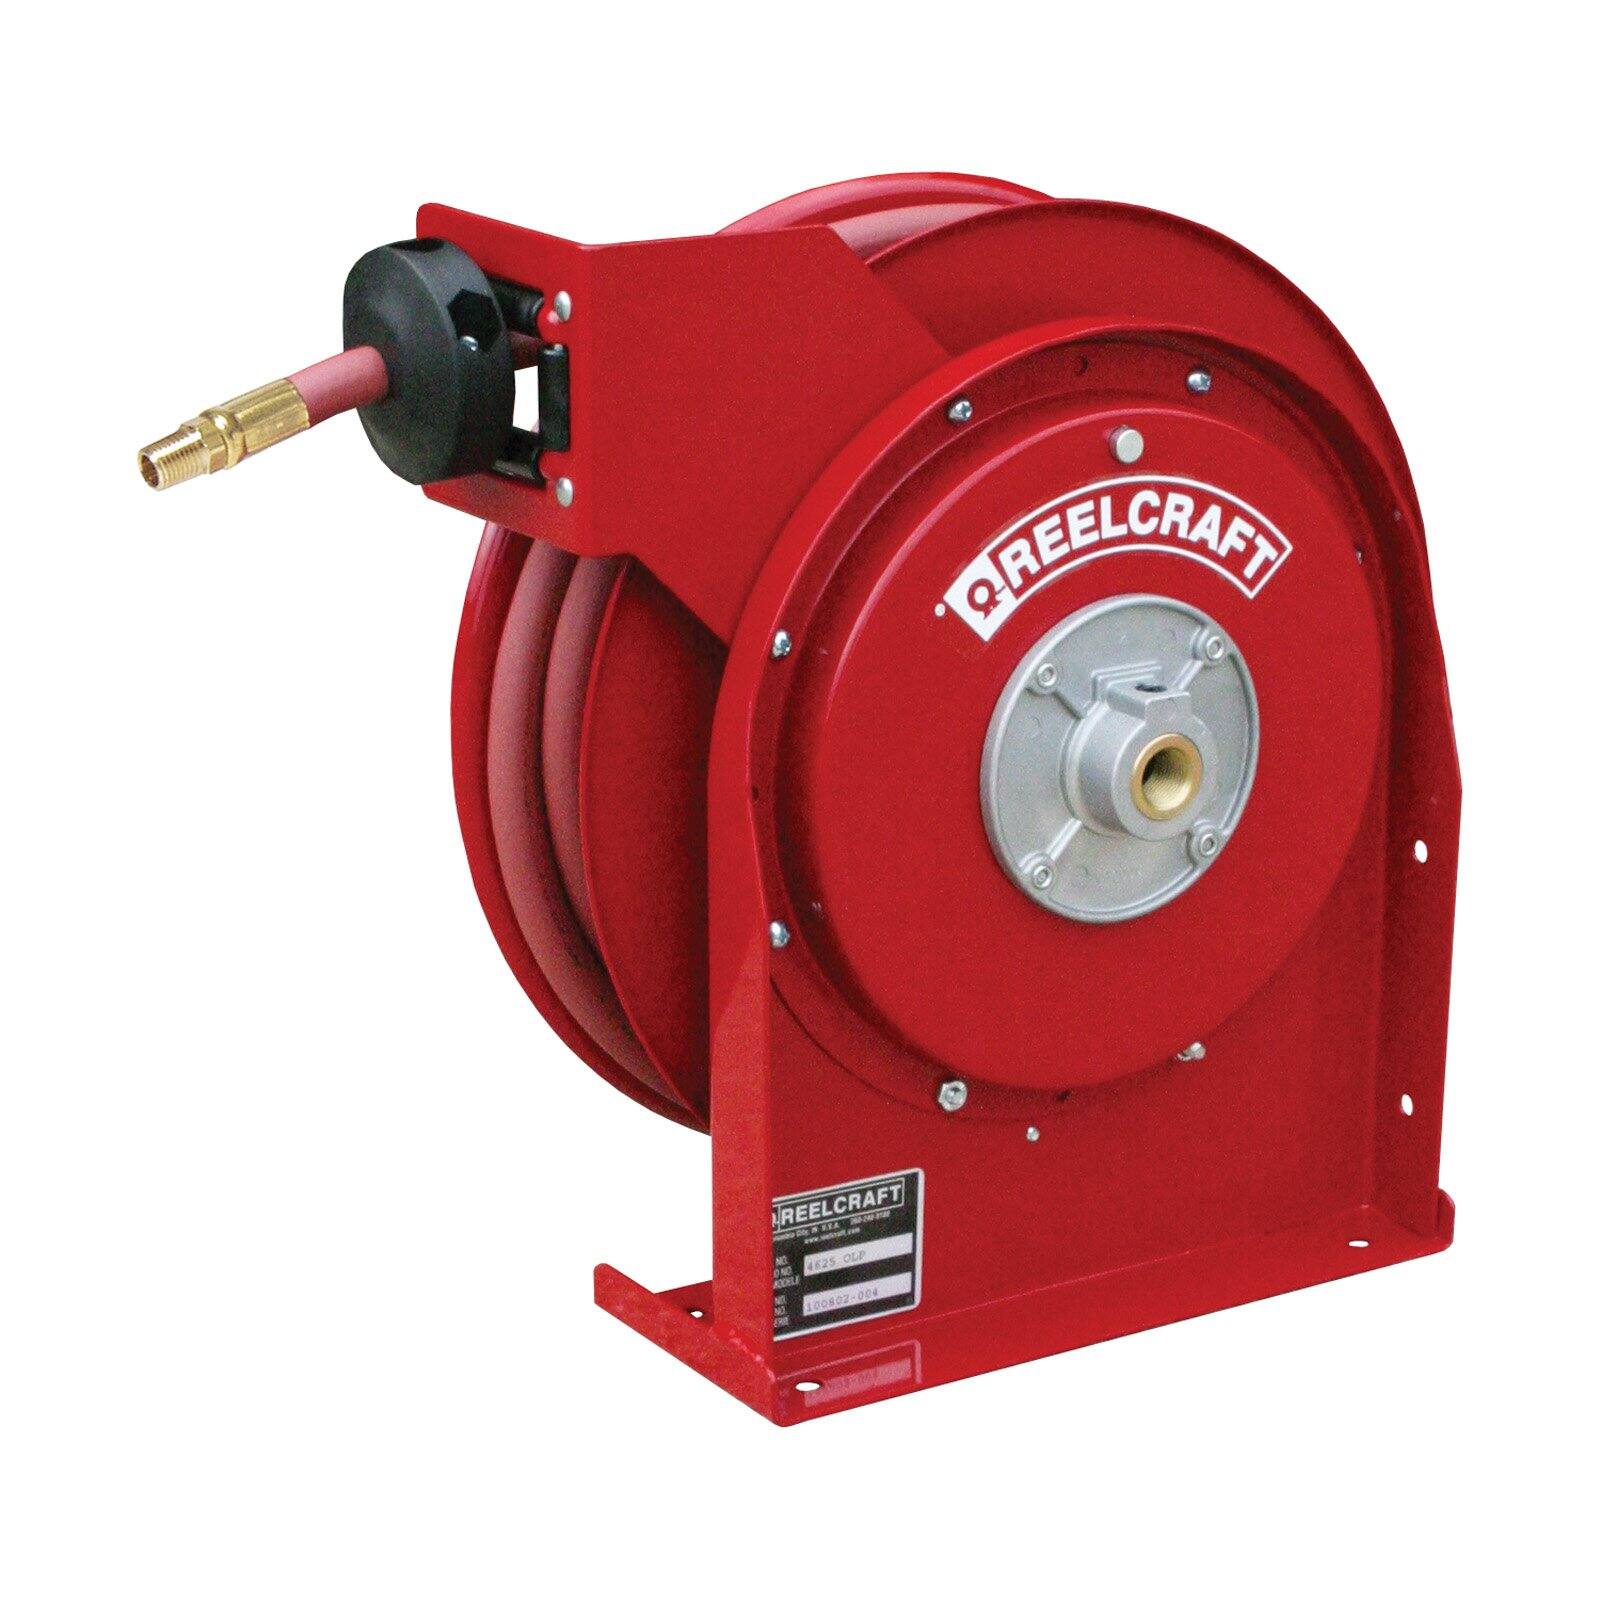 Reelcraft Premium Duty Compact Air/Water 3/8 in. Hose Reel - image 2 of 2